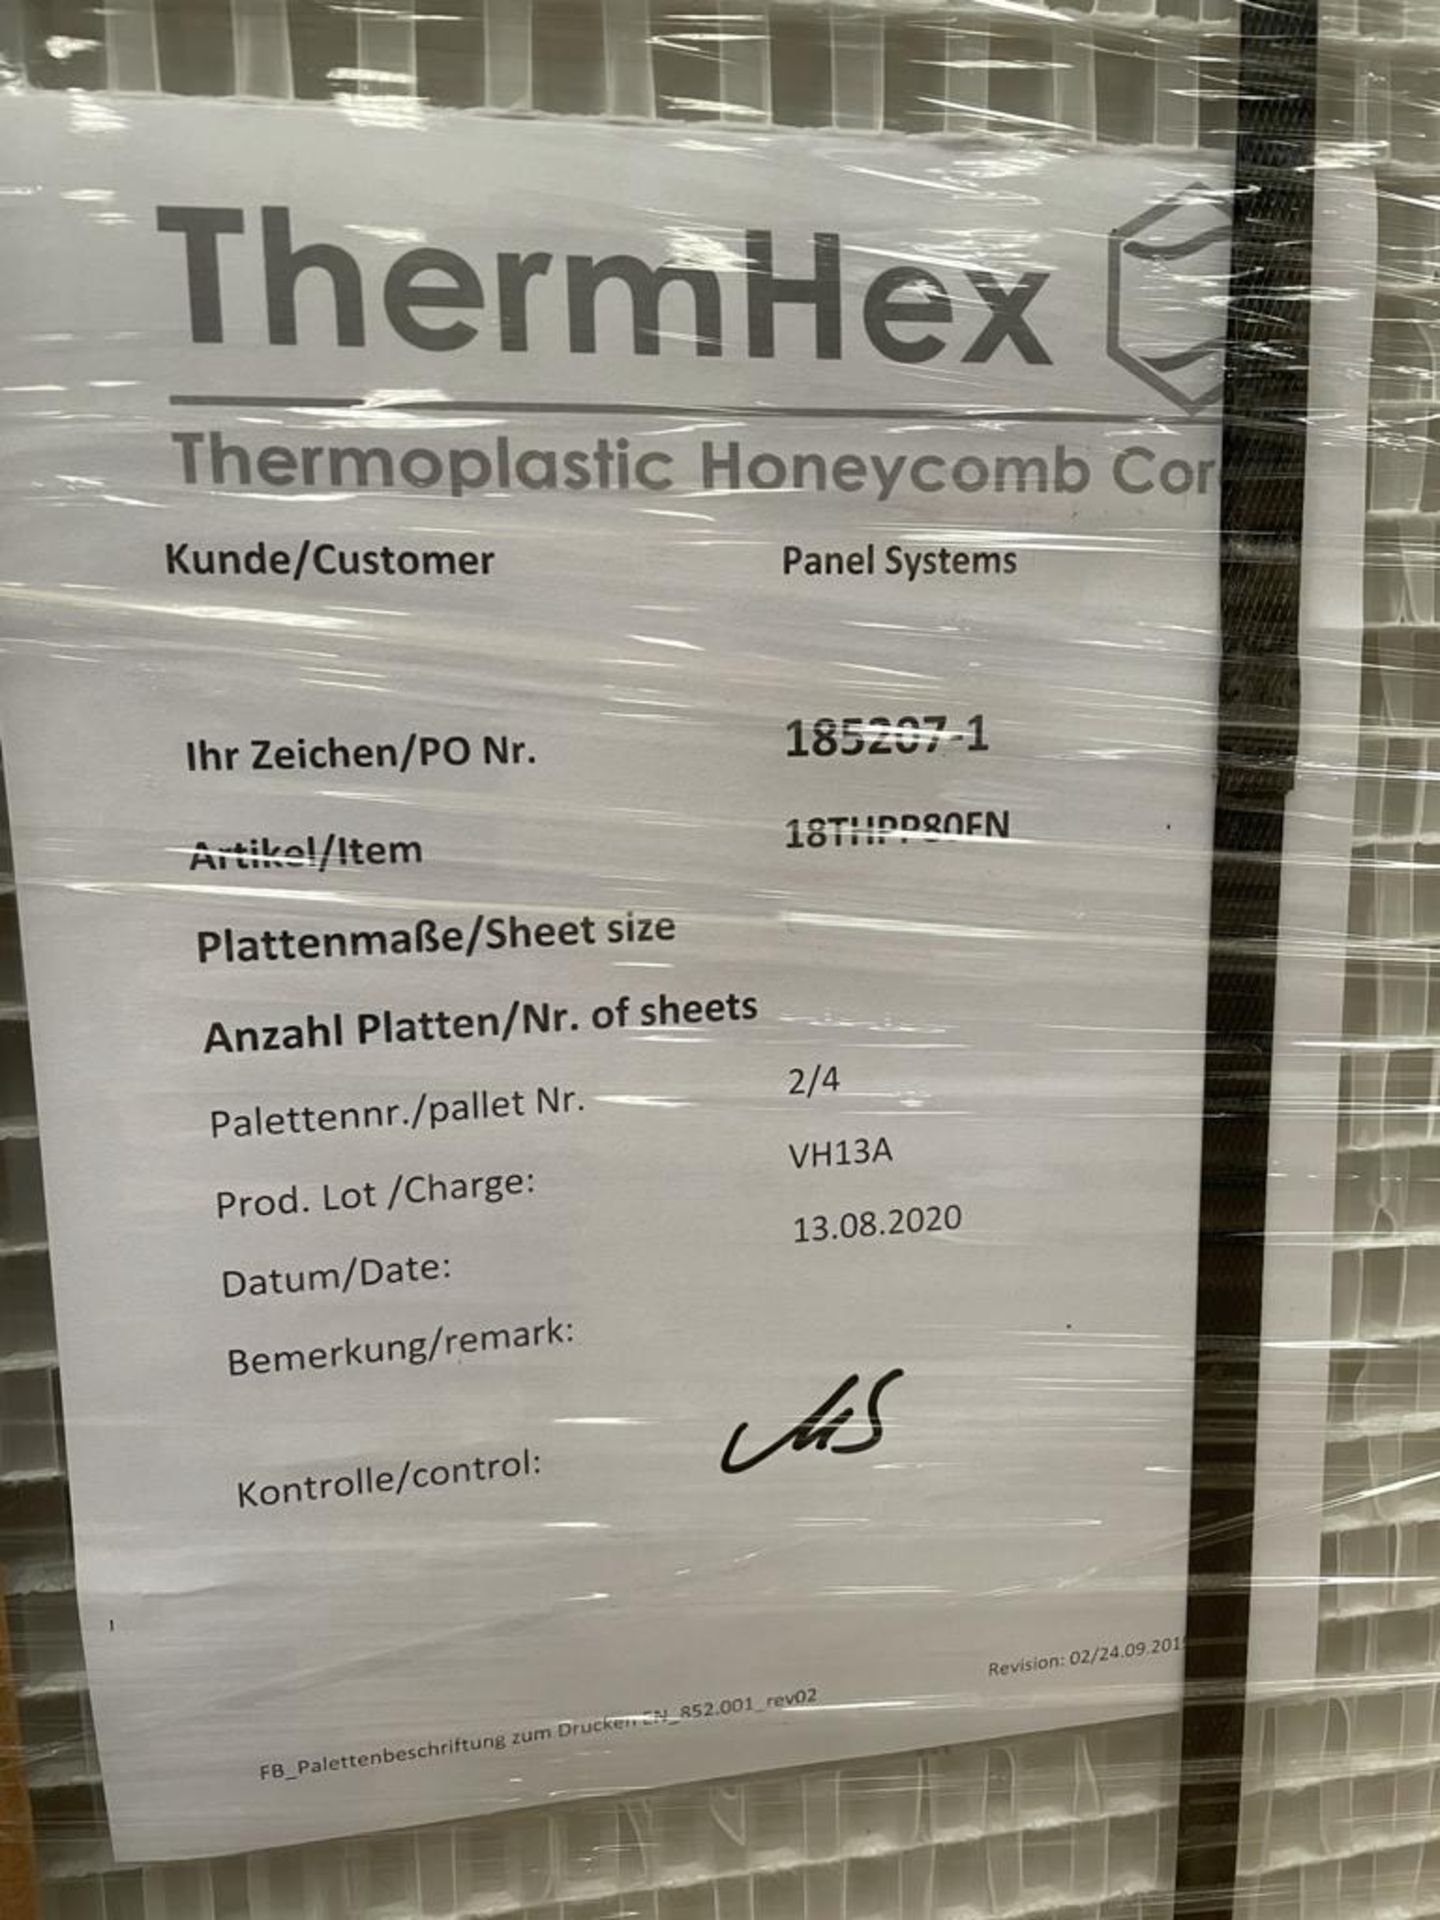 6 x ThermHex Thermoplastic Honeycomb Core Panels - Size 3175 x 1210 x 20mm - New Stock - Lightweight - Image 2 of 8